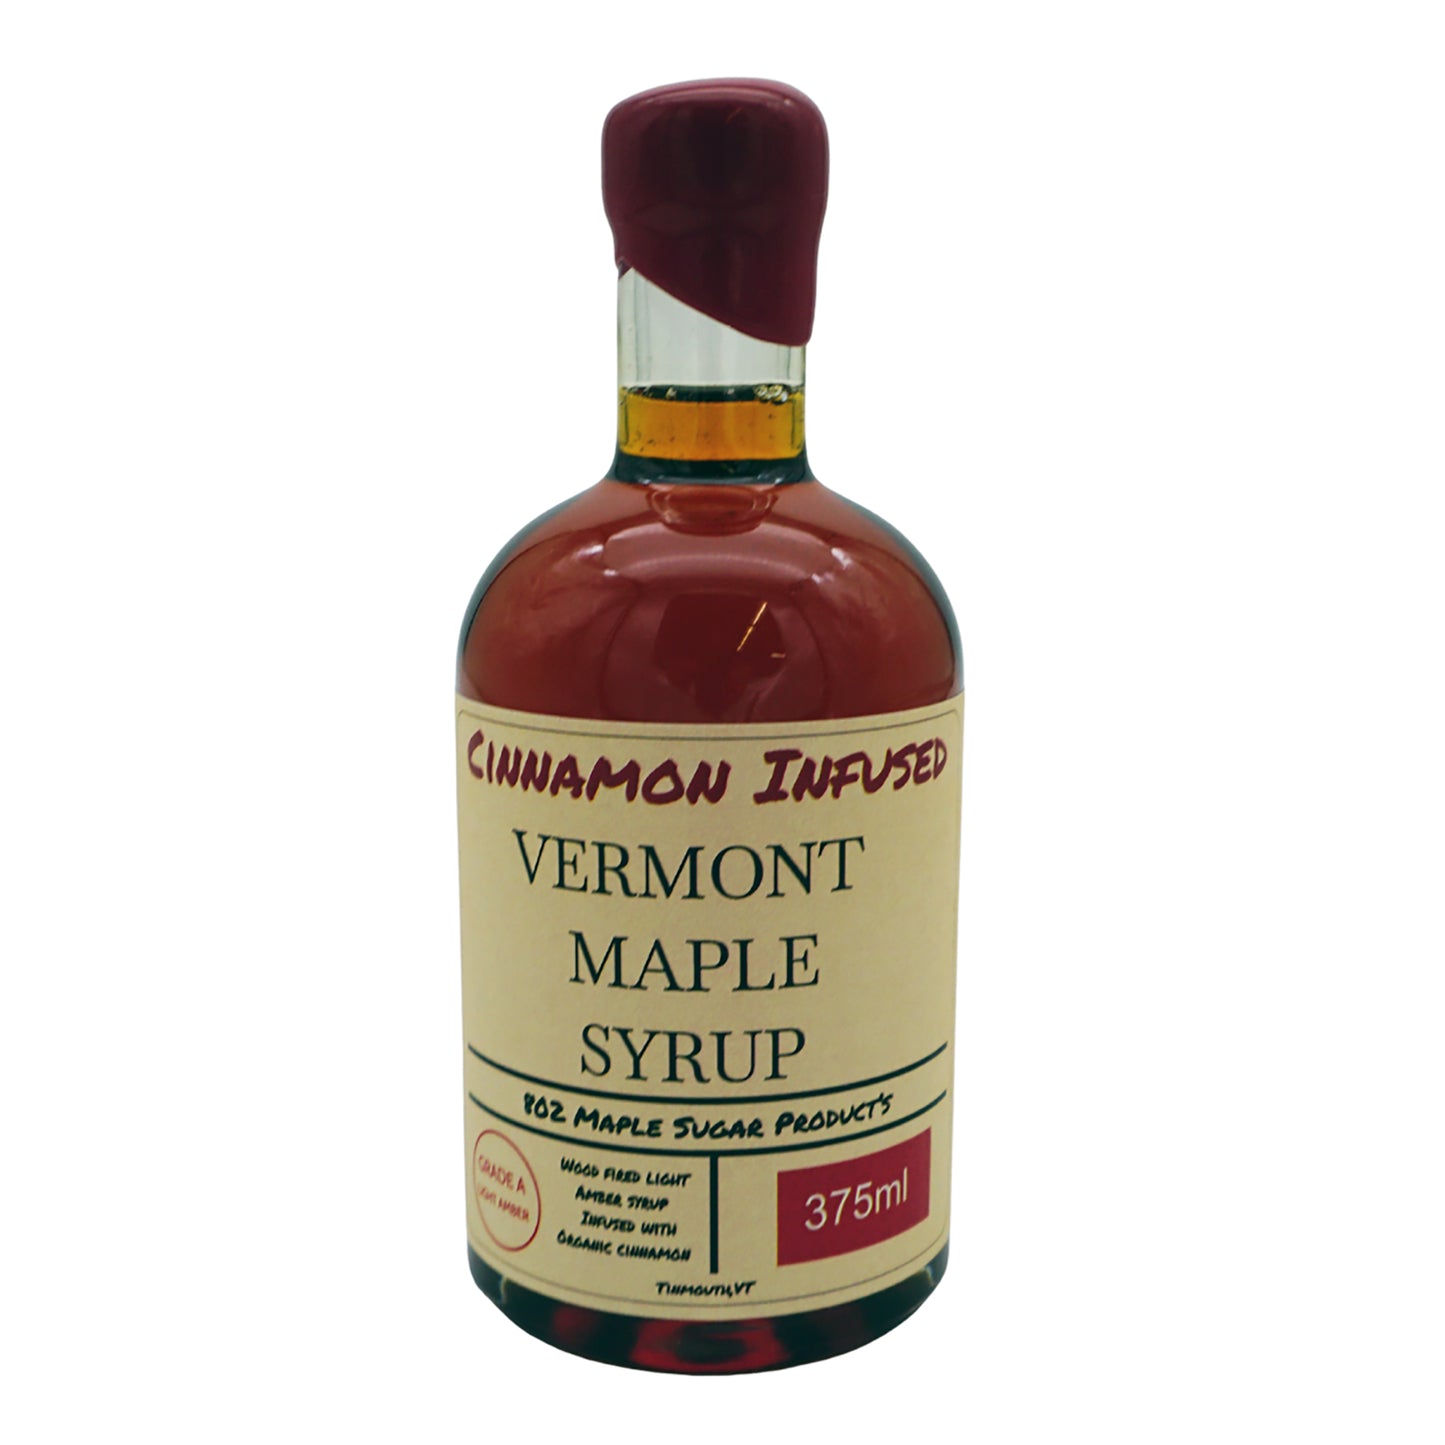 Cinnamon Infused Vermont Maple Syrup